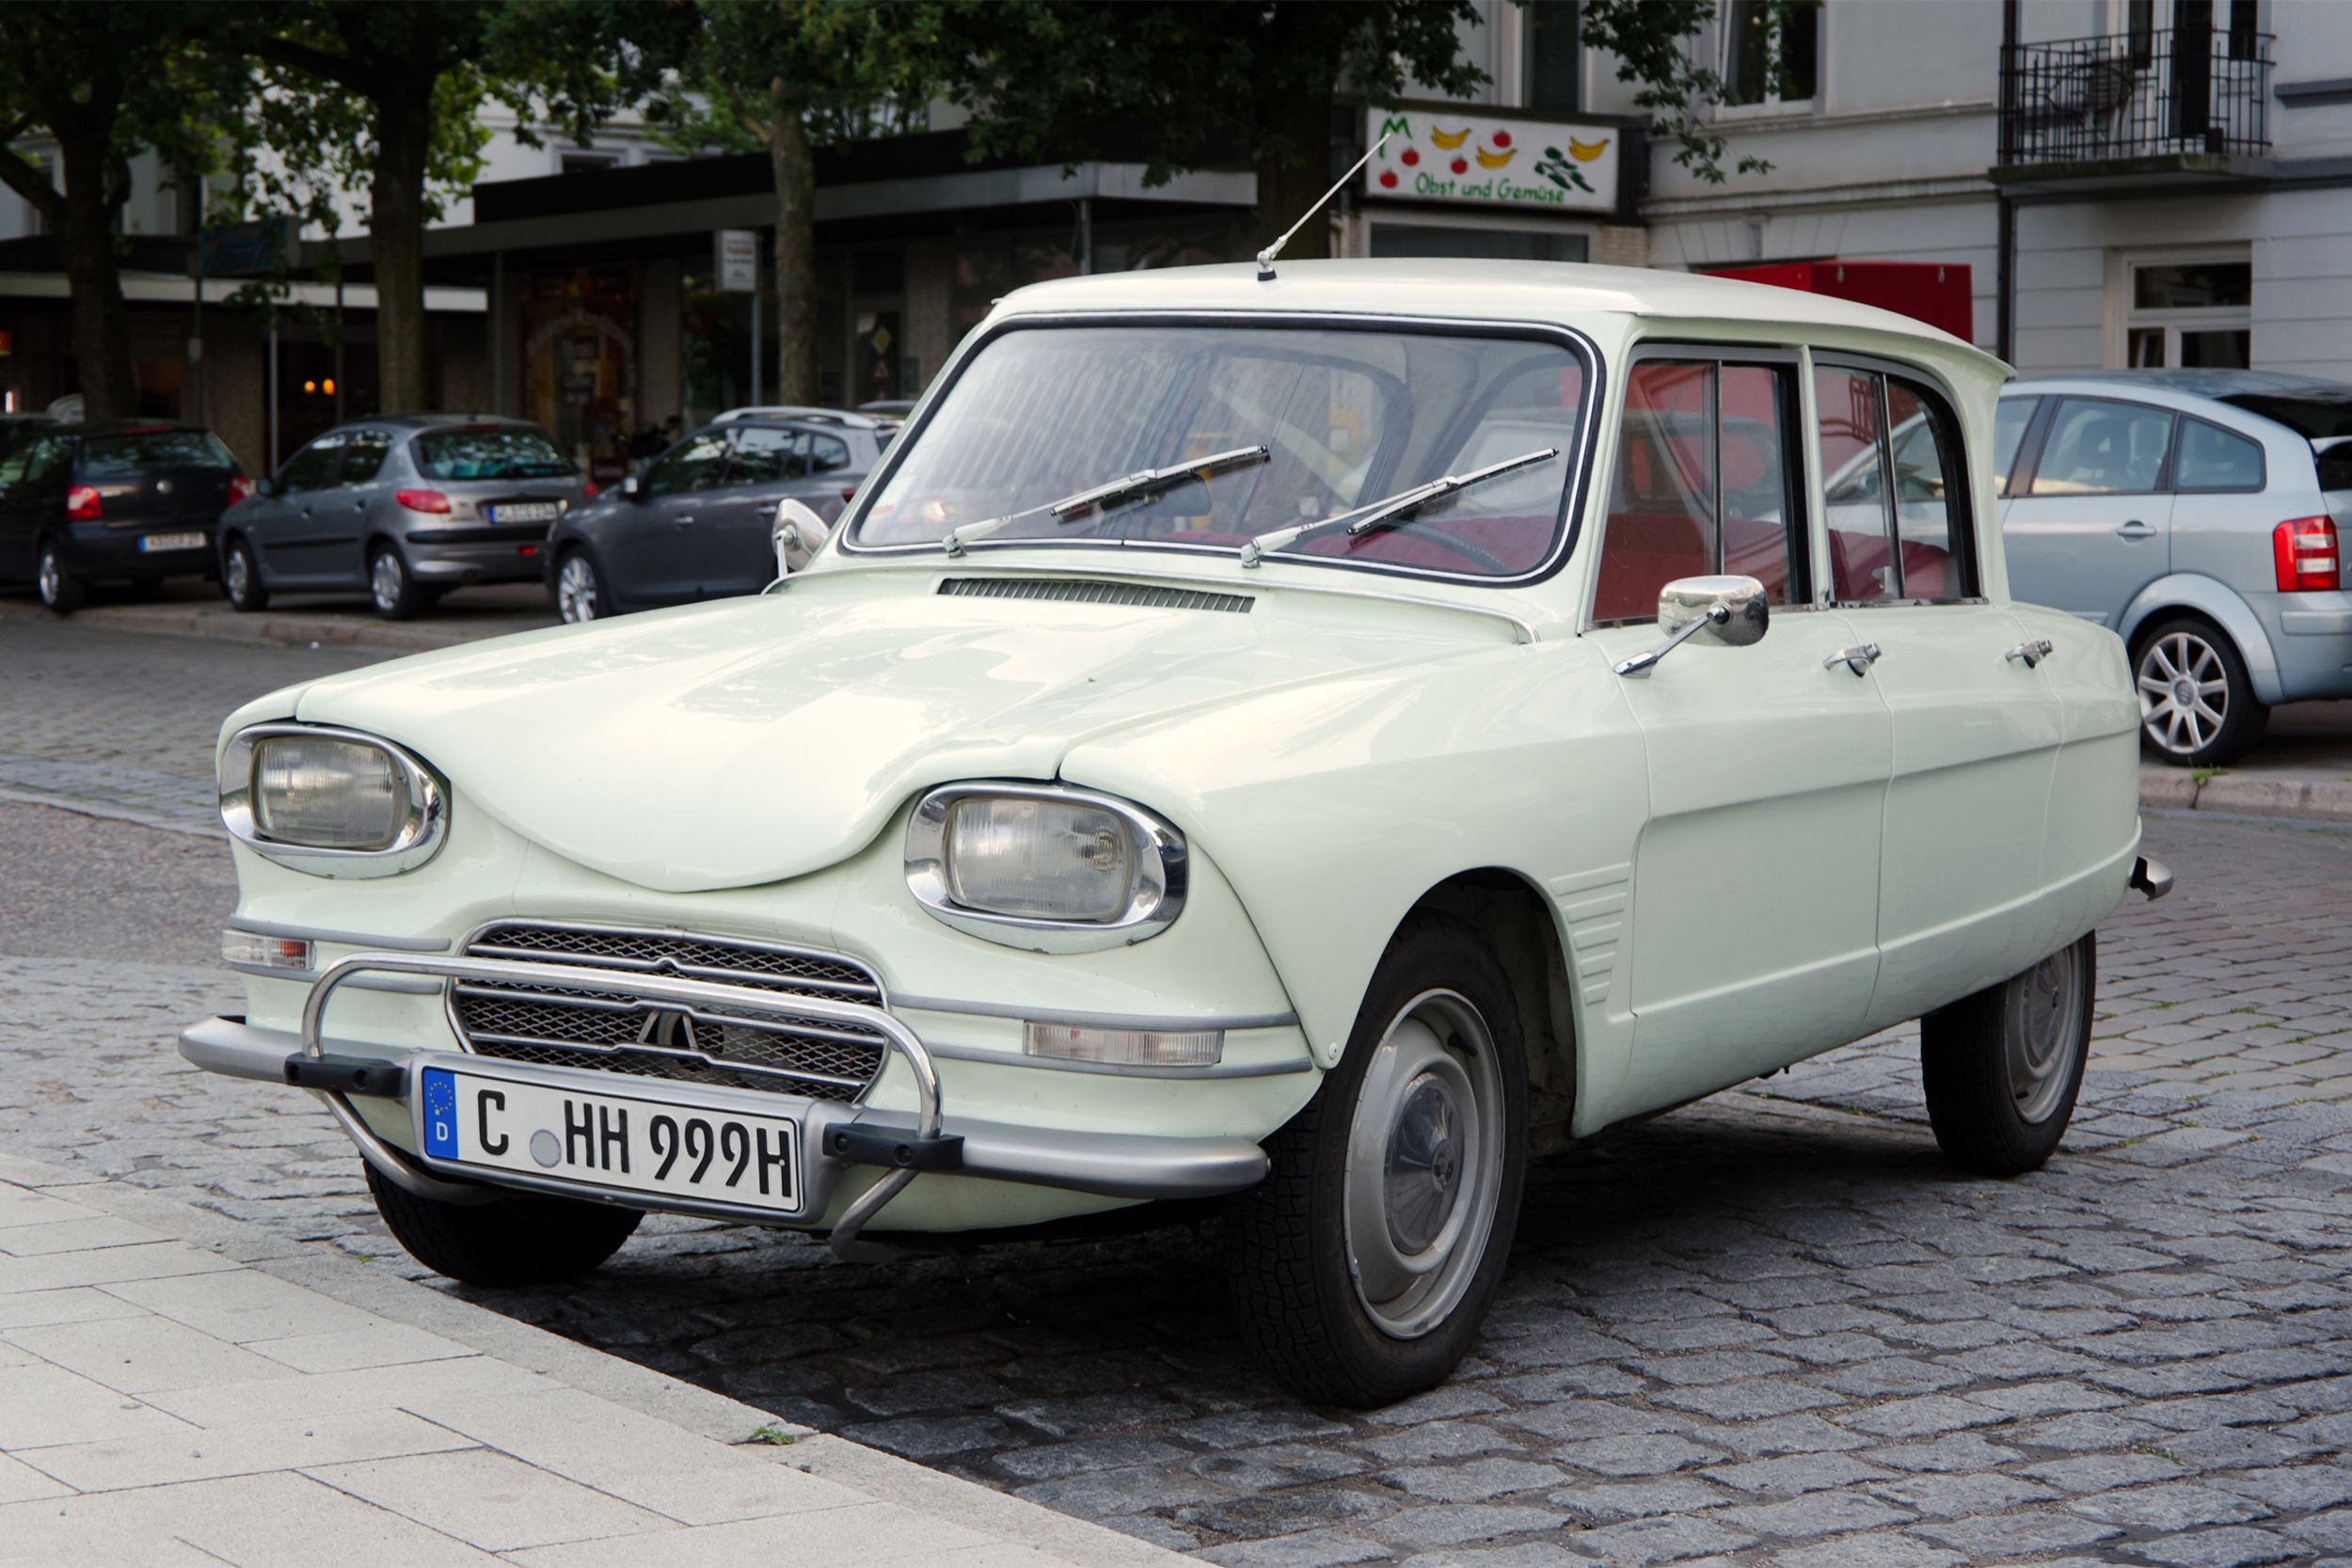 <p>French automaker Citroen desperately <a href="https://oppositelock.kinja.com/hello-darkness-citroens-old-ami-the-complex-history-o-1783044782">needed a midrange car</a> that would hold its own against competitors such as Volkswagen and Renault in the '60s. Instead, it produced the Ami, with an oddly raked back window that didn't exactly appeal to buyers. According to Motor Trend, this was actually <a href="https://www.motortrend.com/news/citroen-ami-6/">a cost-cutting move</a> because the trunk lid could be attached up there to stay open, no prop rod or counter springs necessary. Whatever the case, the result was "the most ungainly design ever."</p><p><b>Related:</b> <a href="https://blog.cheapism.com/most-popular-volkswagens/">22 Most Popular Volkswagens of All Time</a></p>